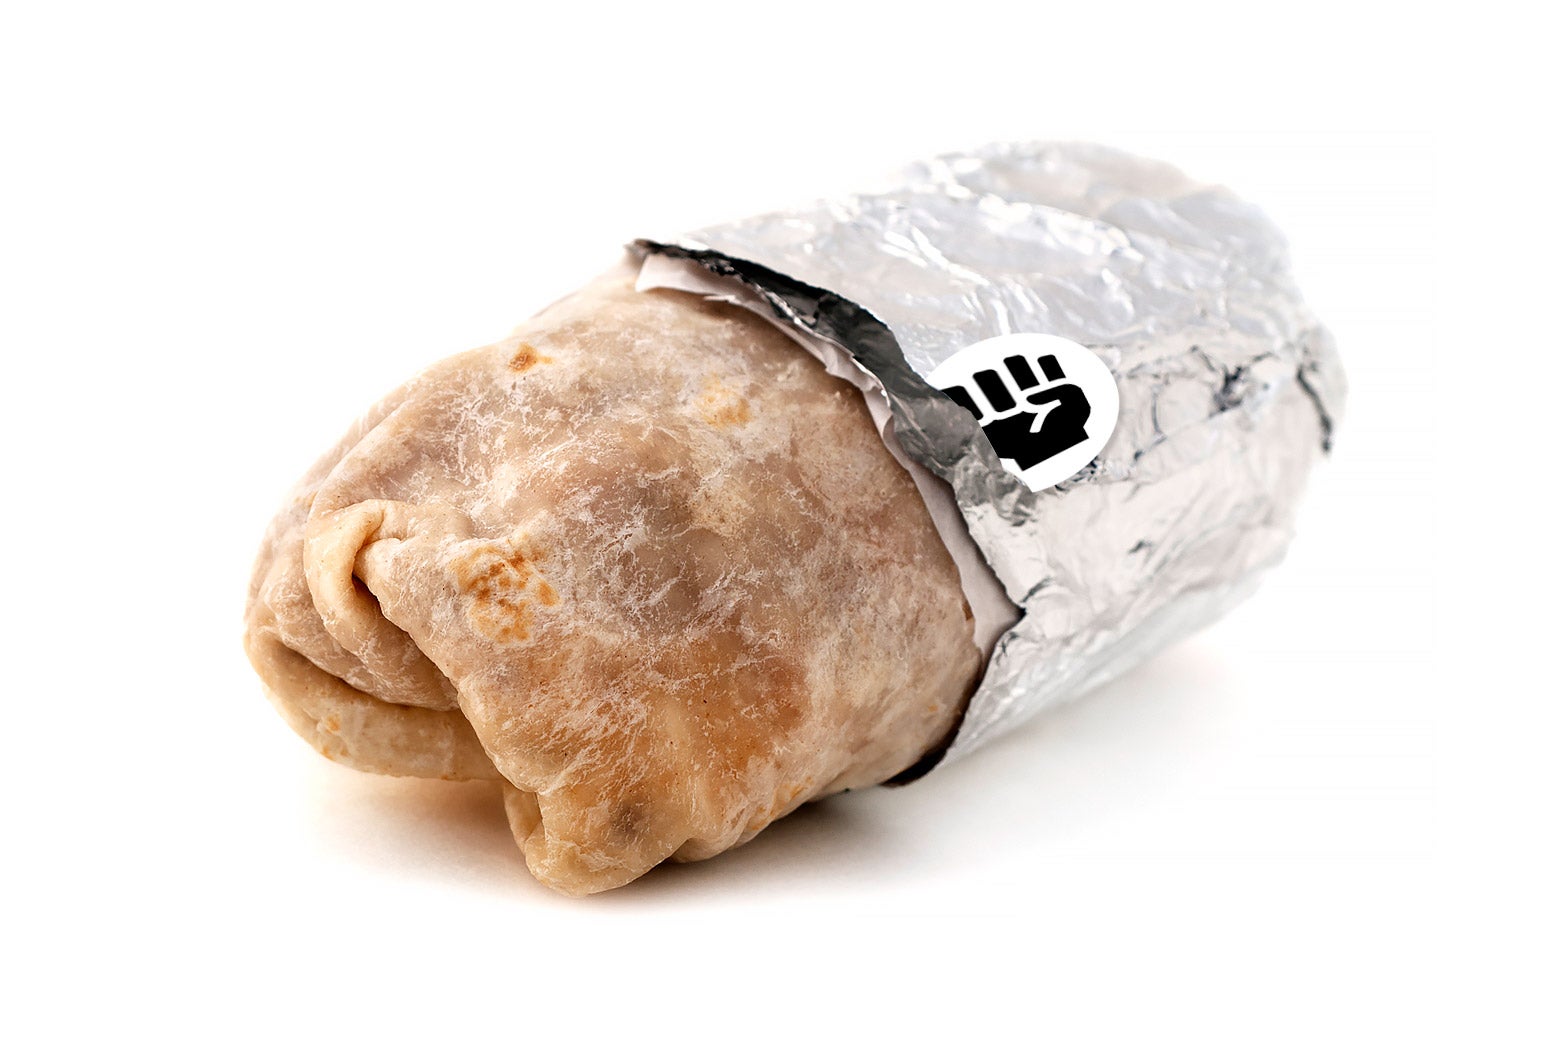 A burrito with a sticker featuring a fist in solidarity on the foil wrapper.